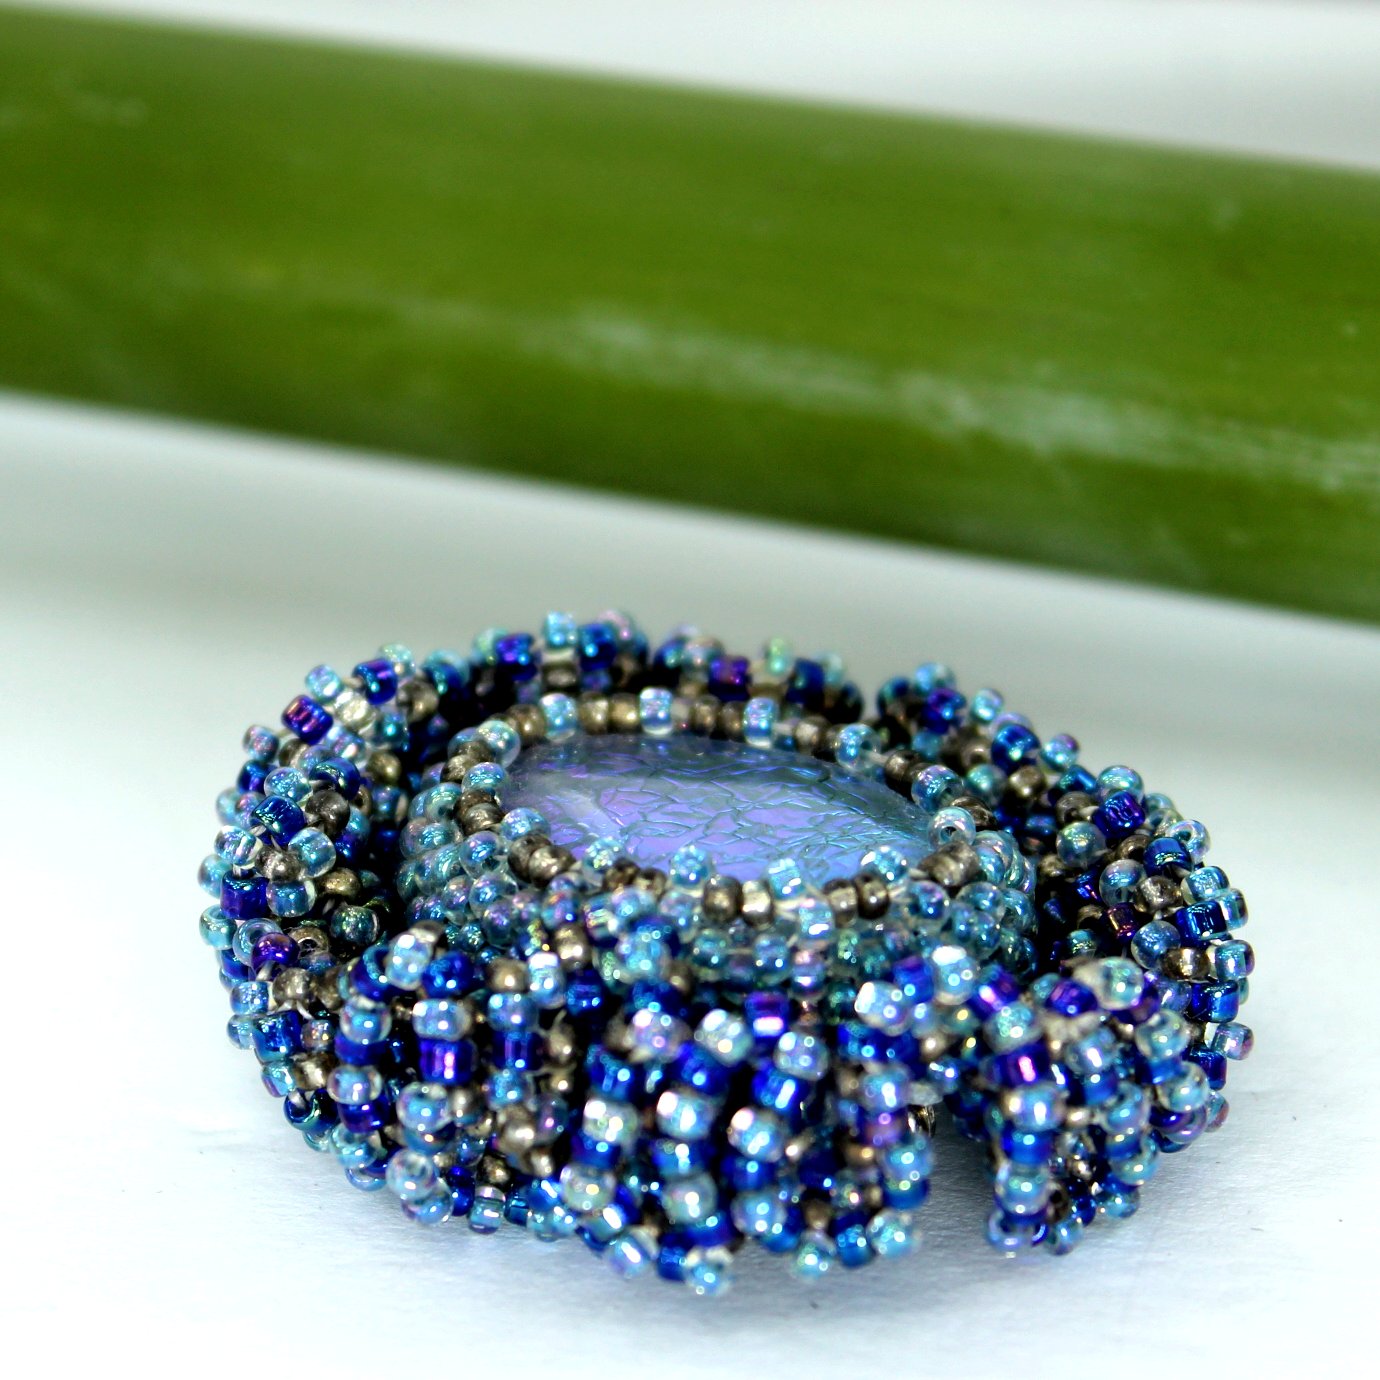 Pat Falk Early Work Glass Pin Iridescent Bead Ruffle Surround Brilliant Blues side and top glass view